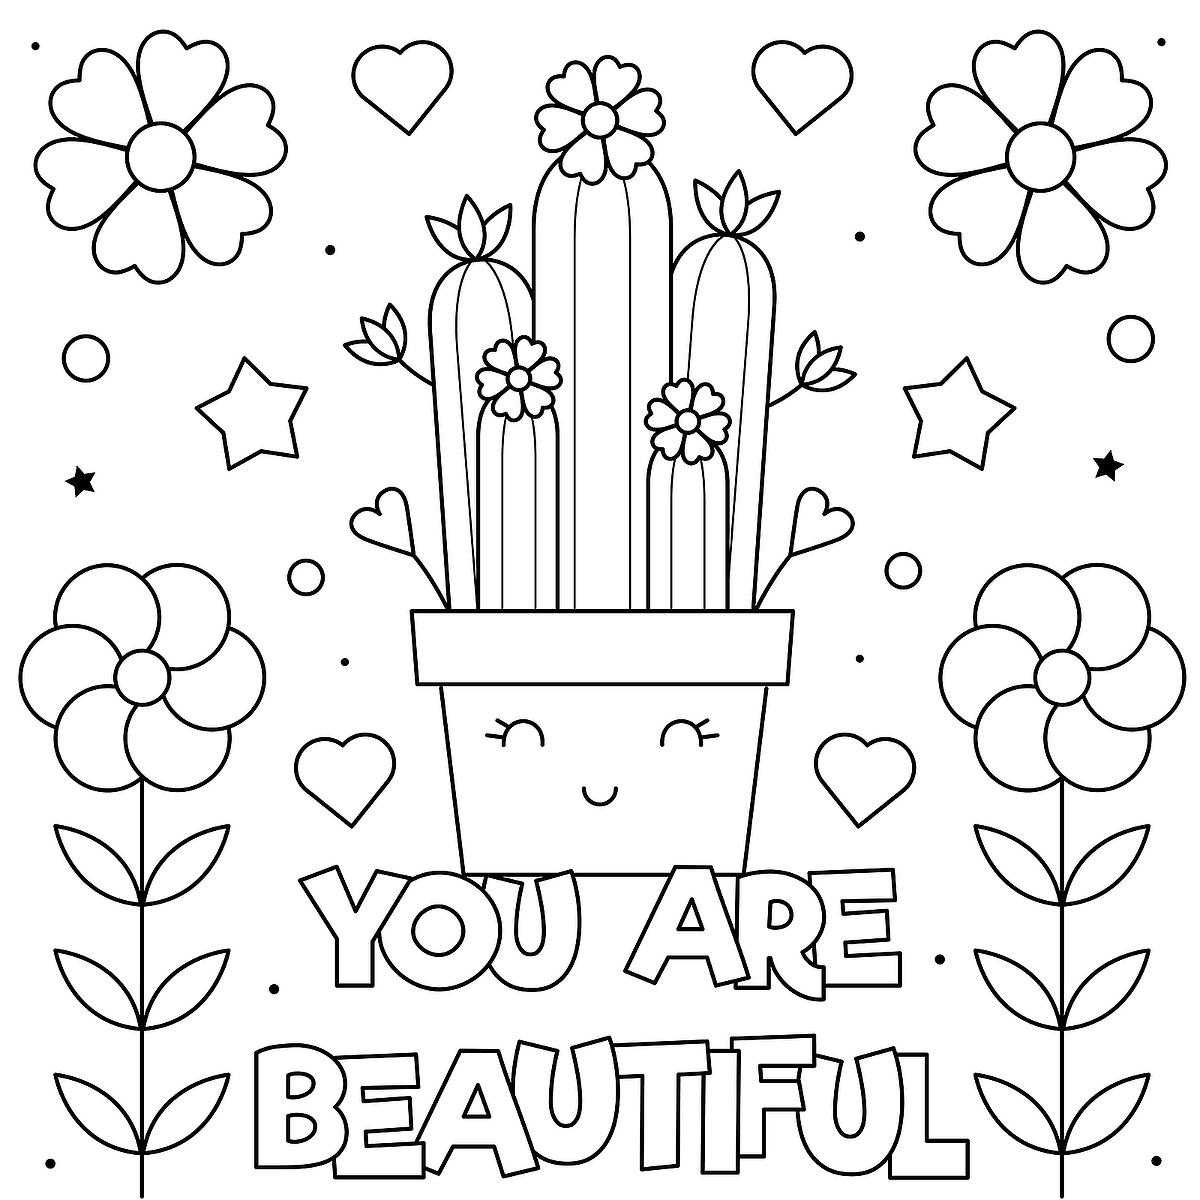 Inspirational coloring pages free printable coloring pages to inspire uplift printables mom